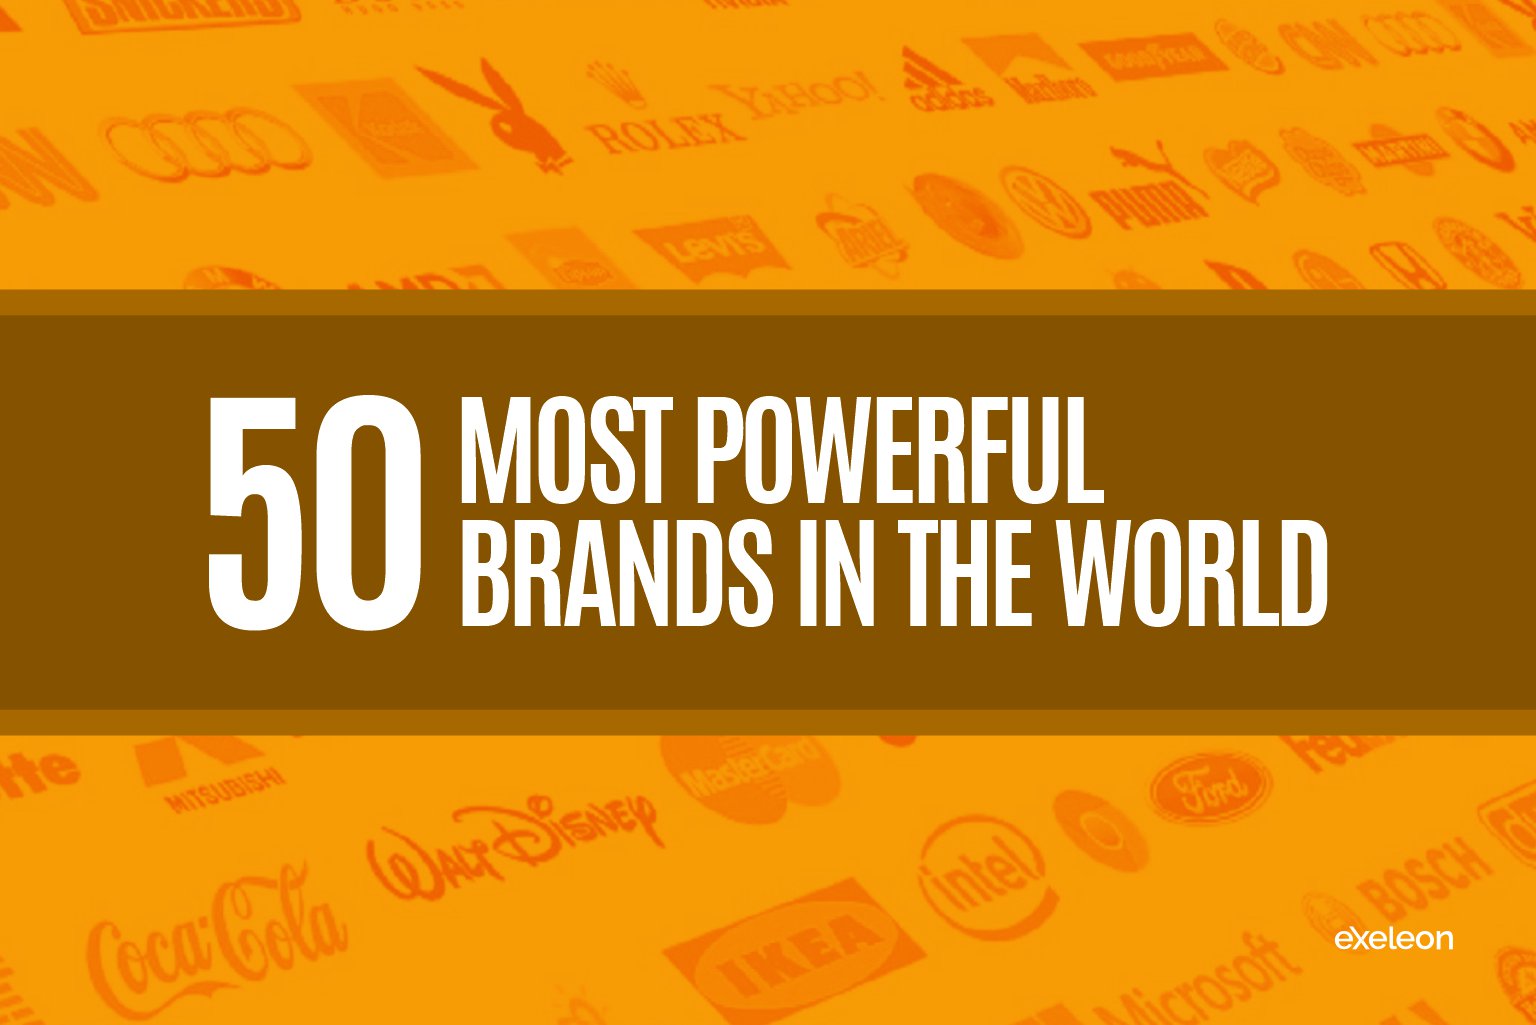 50 Most Powerful Brands in the World_Exeleon Magazine